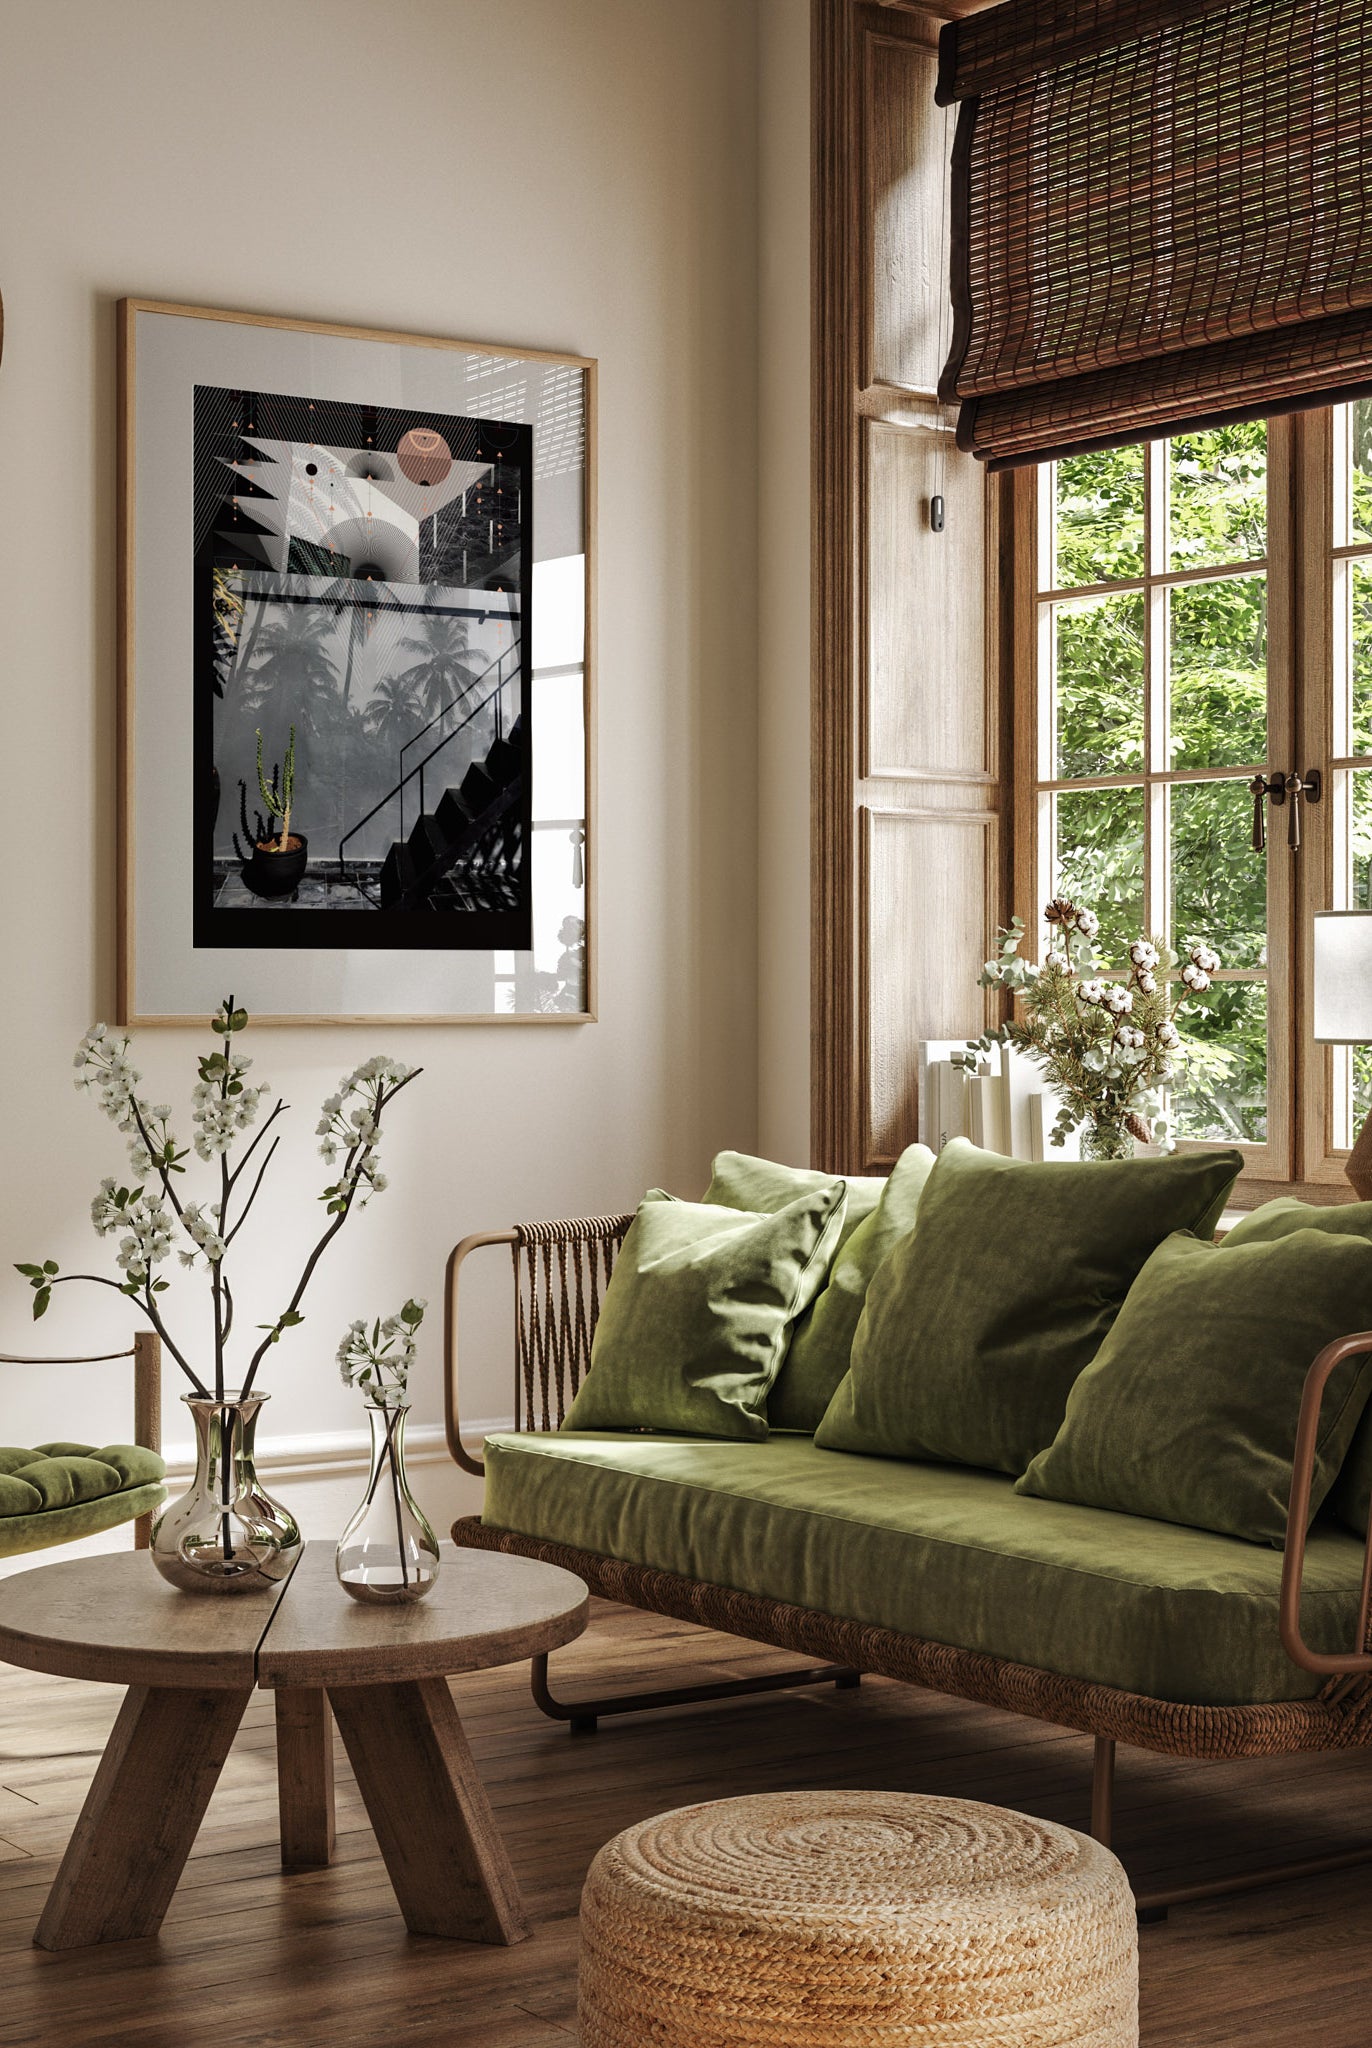 A mock up of a giclee print in a wooden frame in a living room